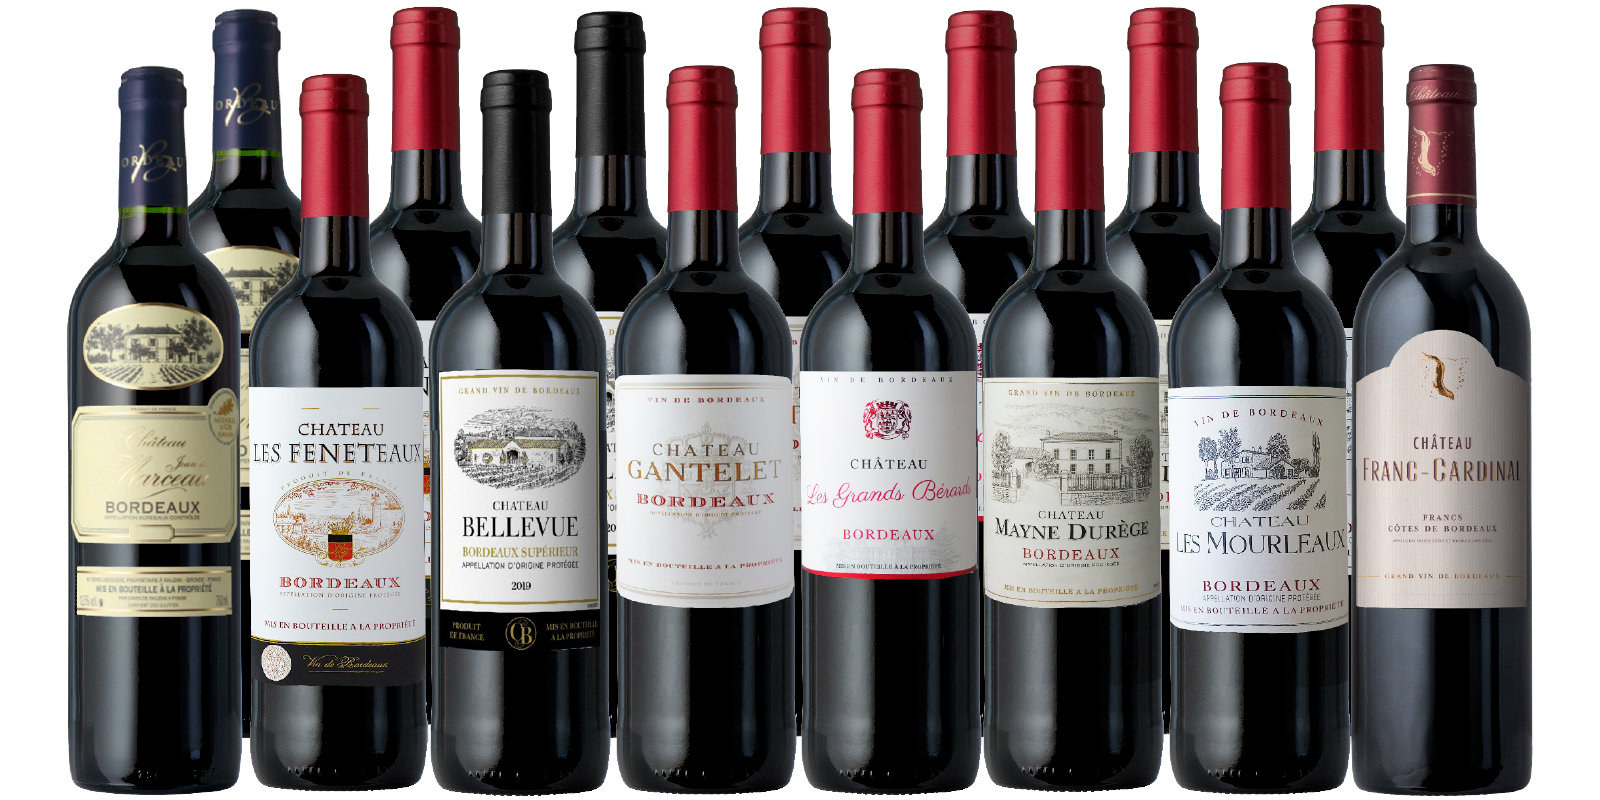 IT'S BACK: The Chateau Bordeaux 15-Pack Special!